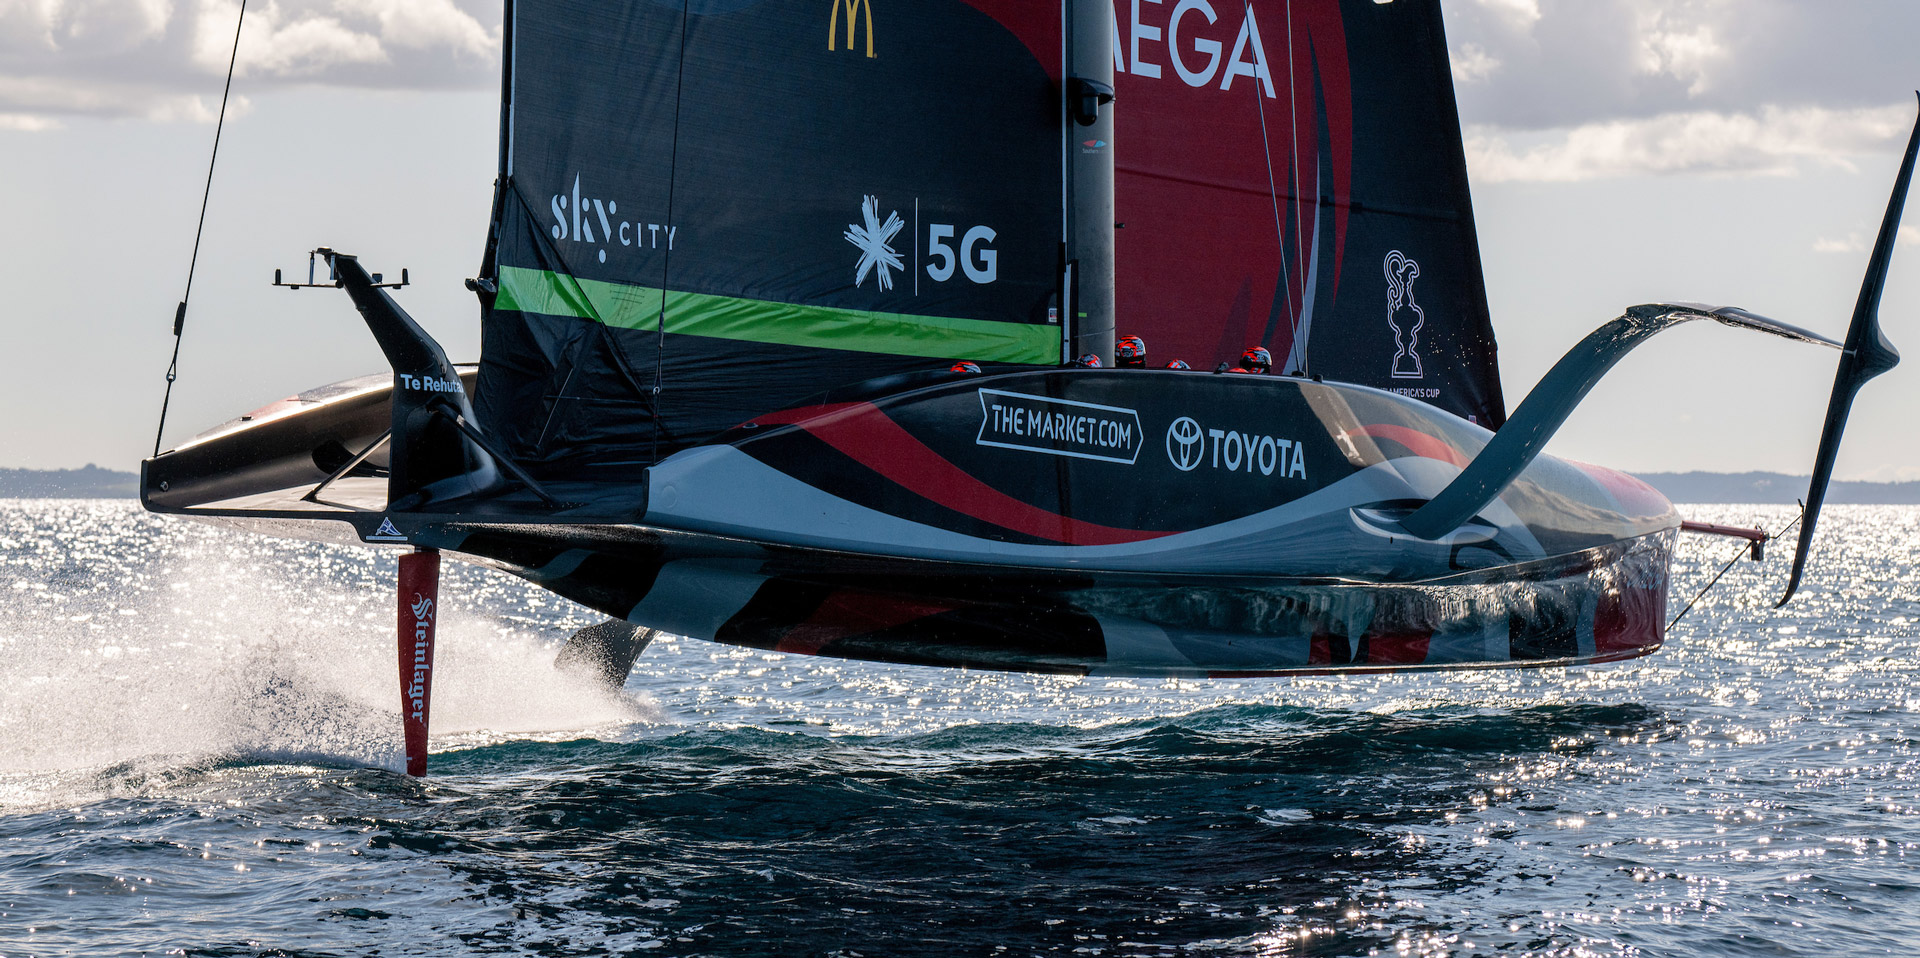 The Race Of Innovation For Emirates Team New Zealand